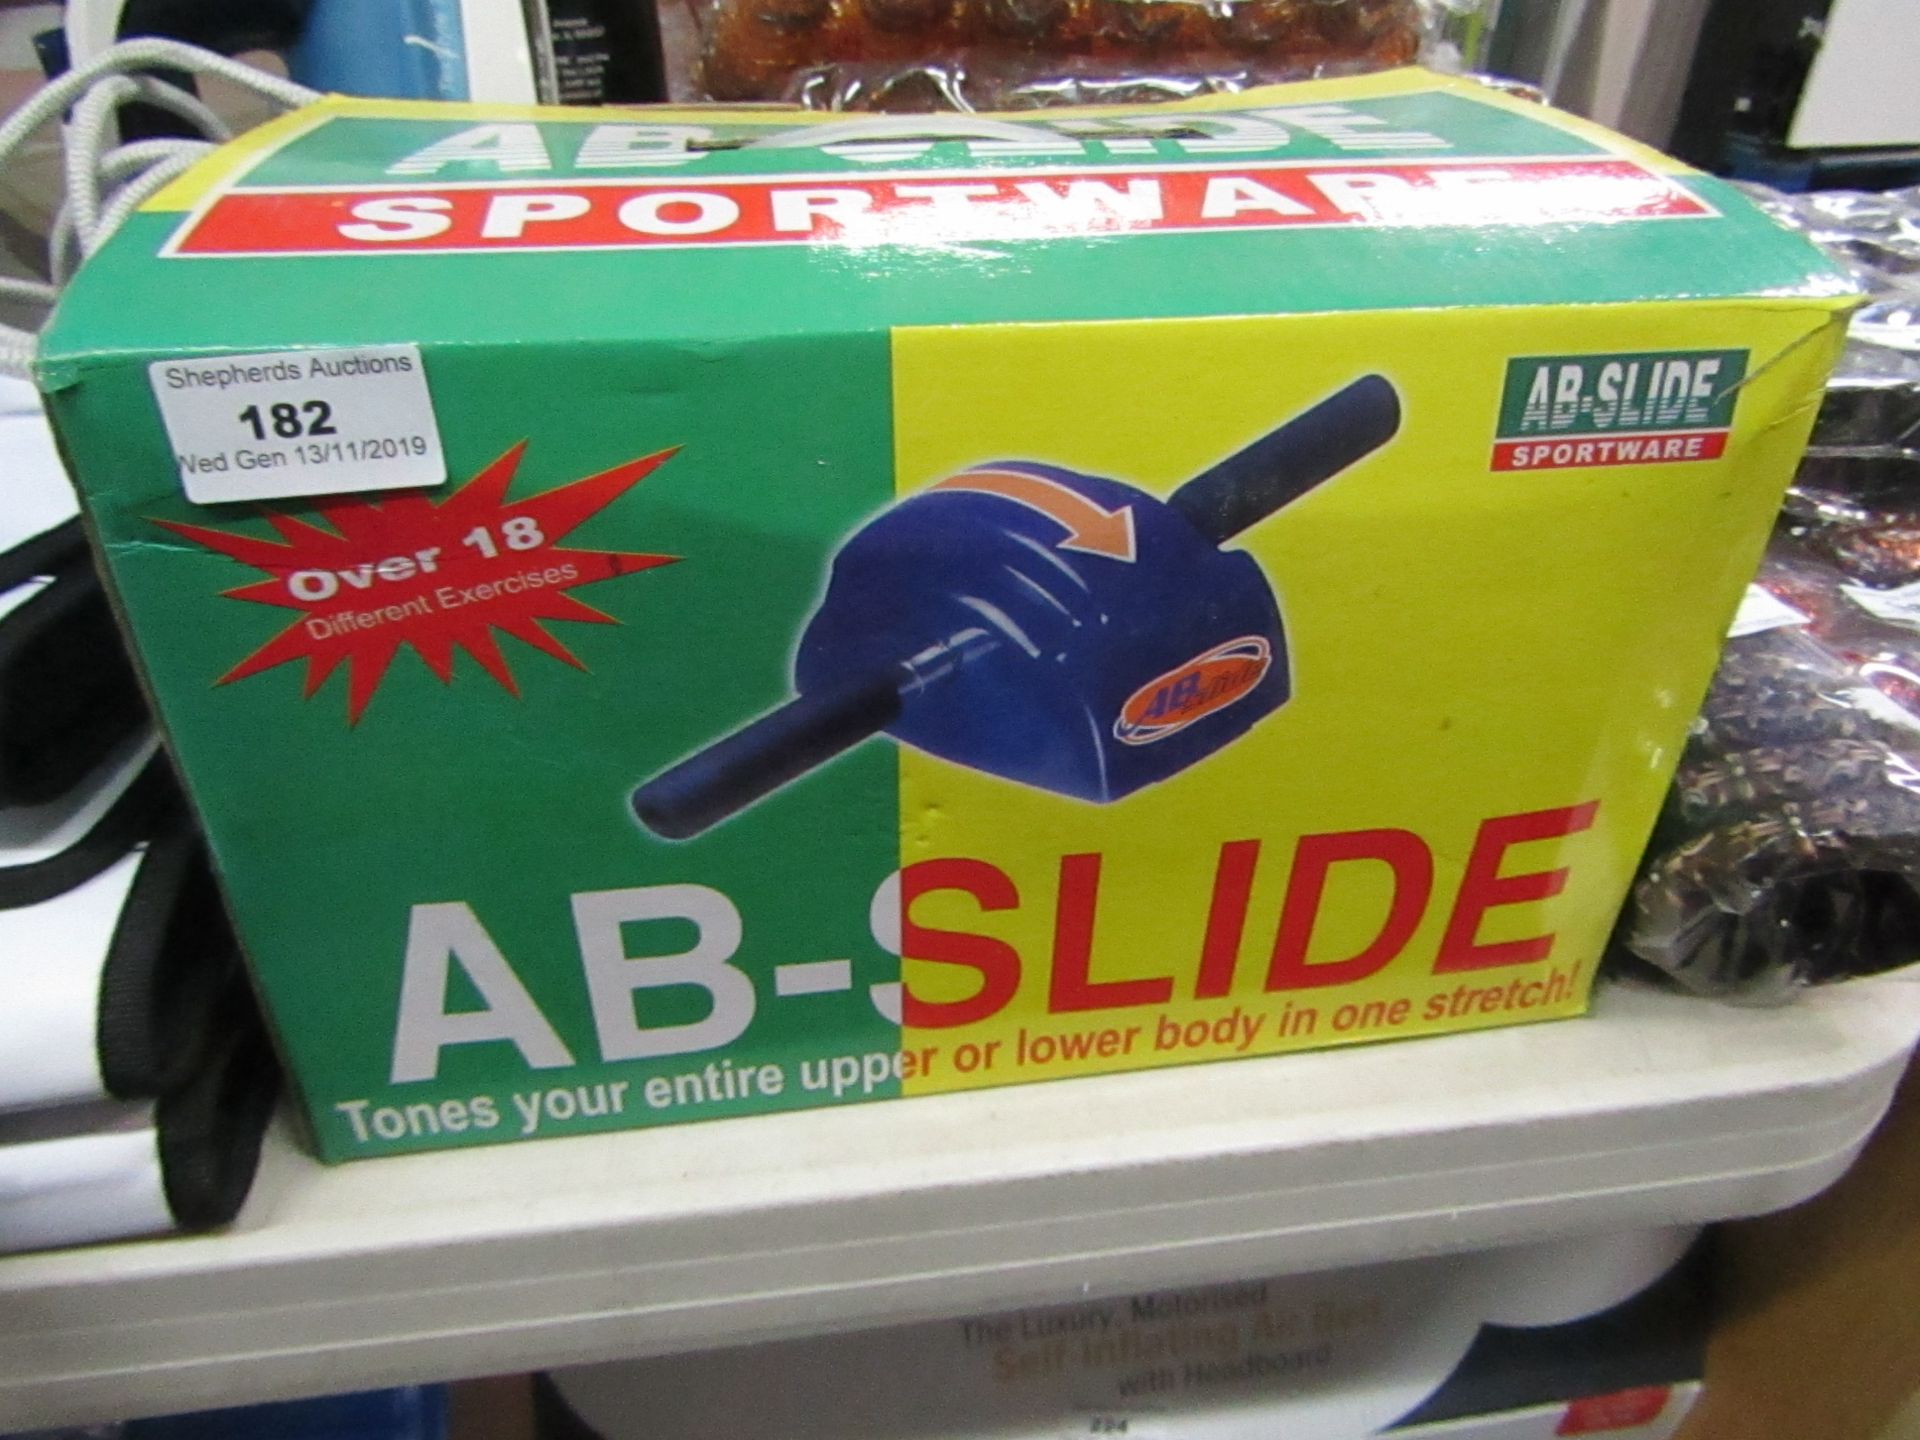 Ab Slide Exercise machine, boxed and looks unsued